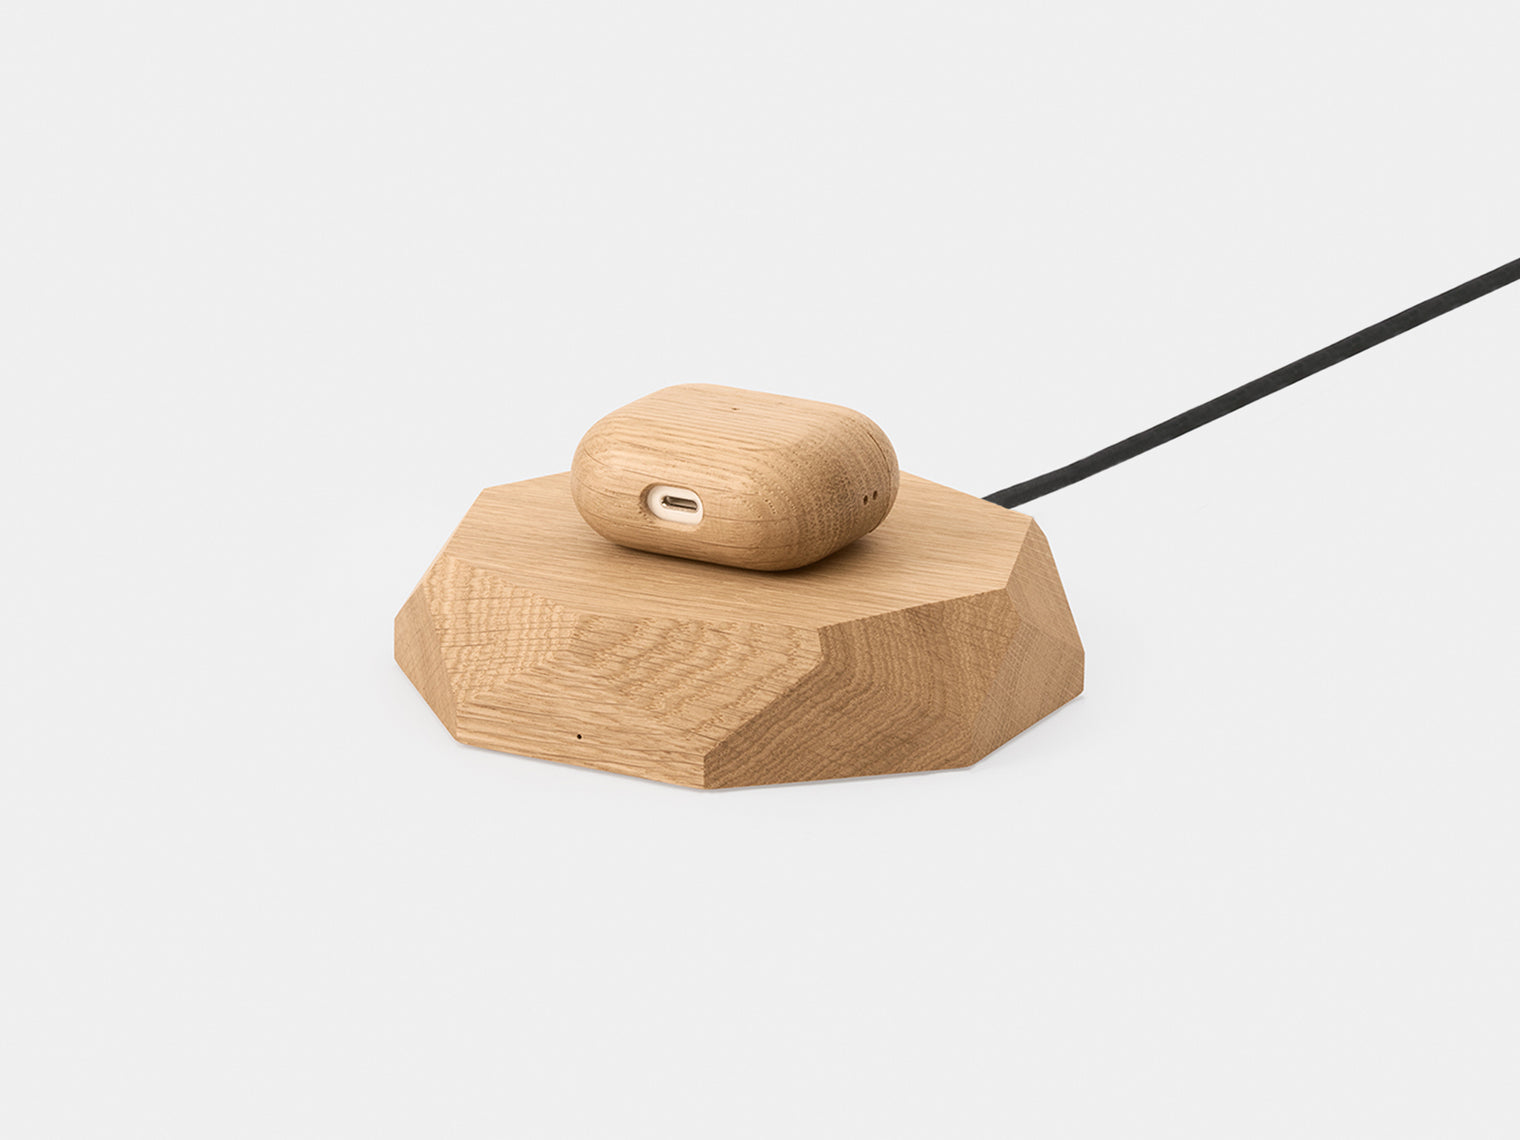 Geometric Charging Pad - Wooden Wireless Charger for iPhone